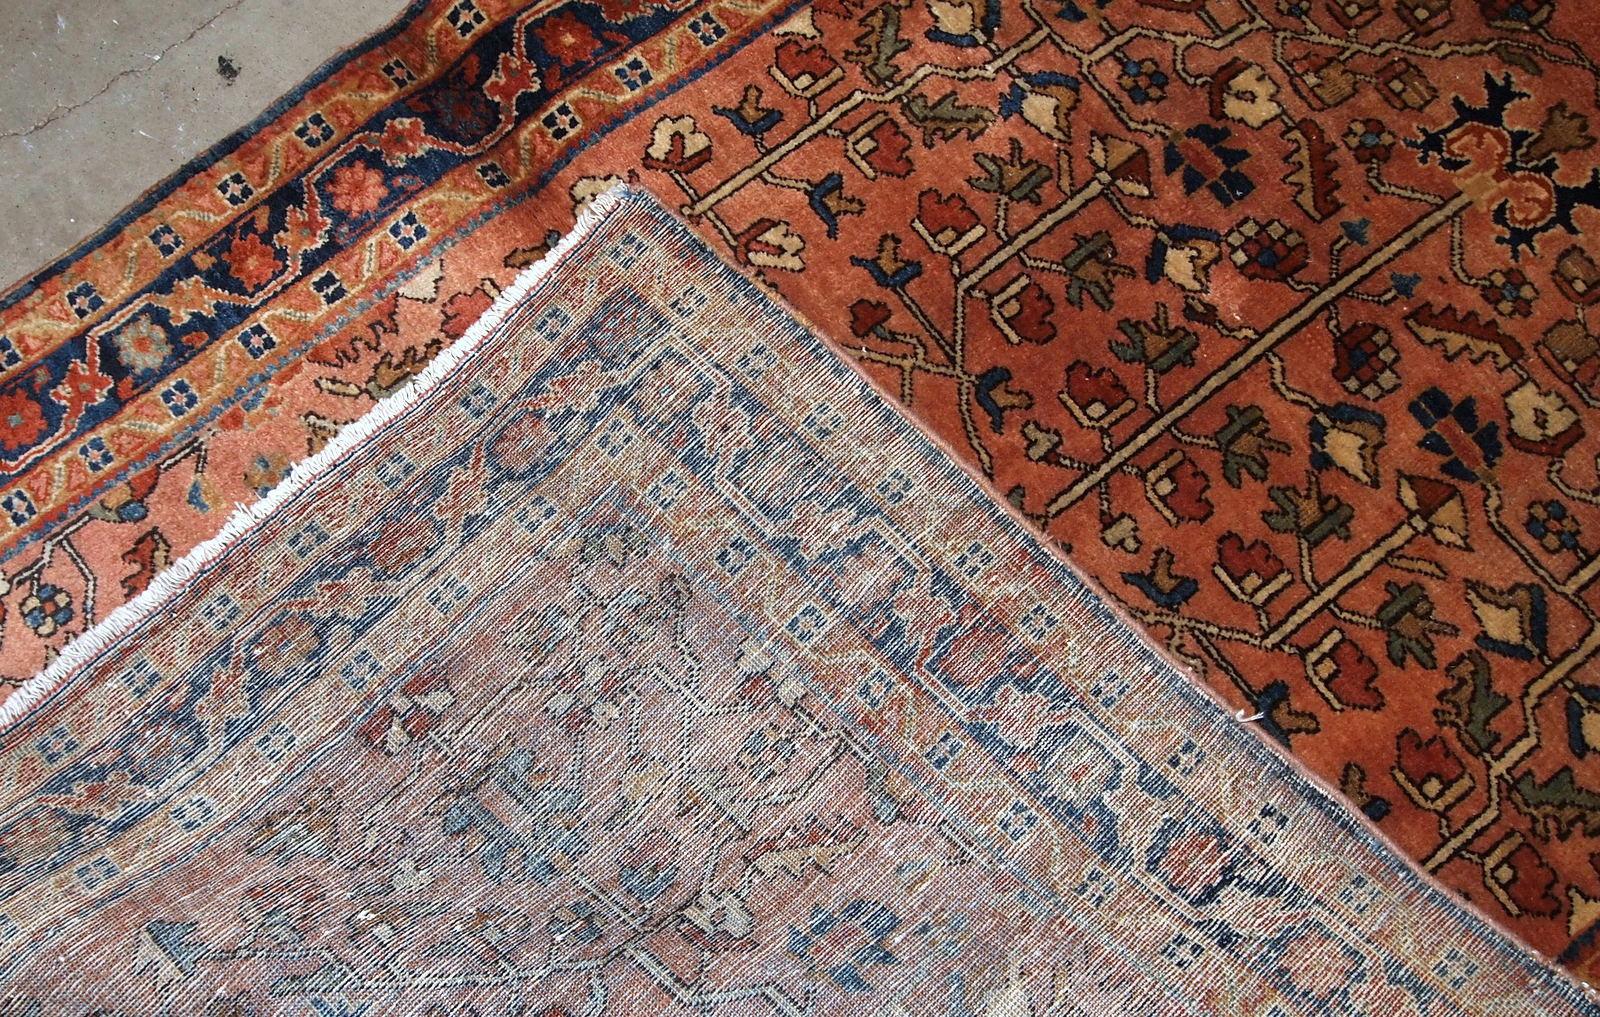 Handmade antique Sarouk style rug in original good condition. The rug is from the beginning of 20th century made in pale red wool and unusual design.

-Condition: Original good,

-circa 1920s,

-Size: 3.7' x 5.4' (113 cm x 164